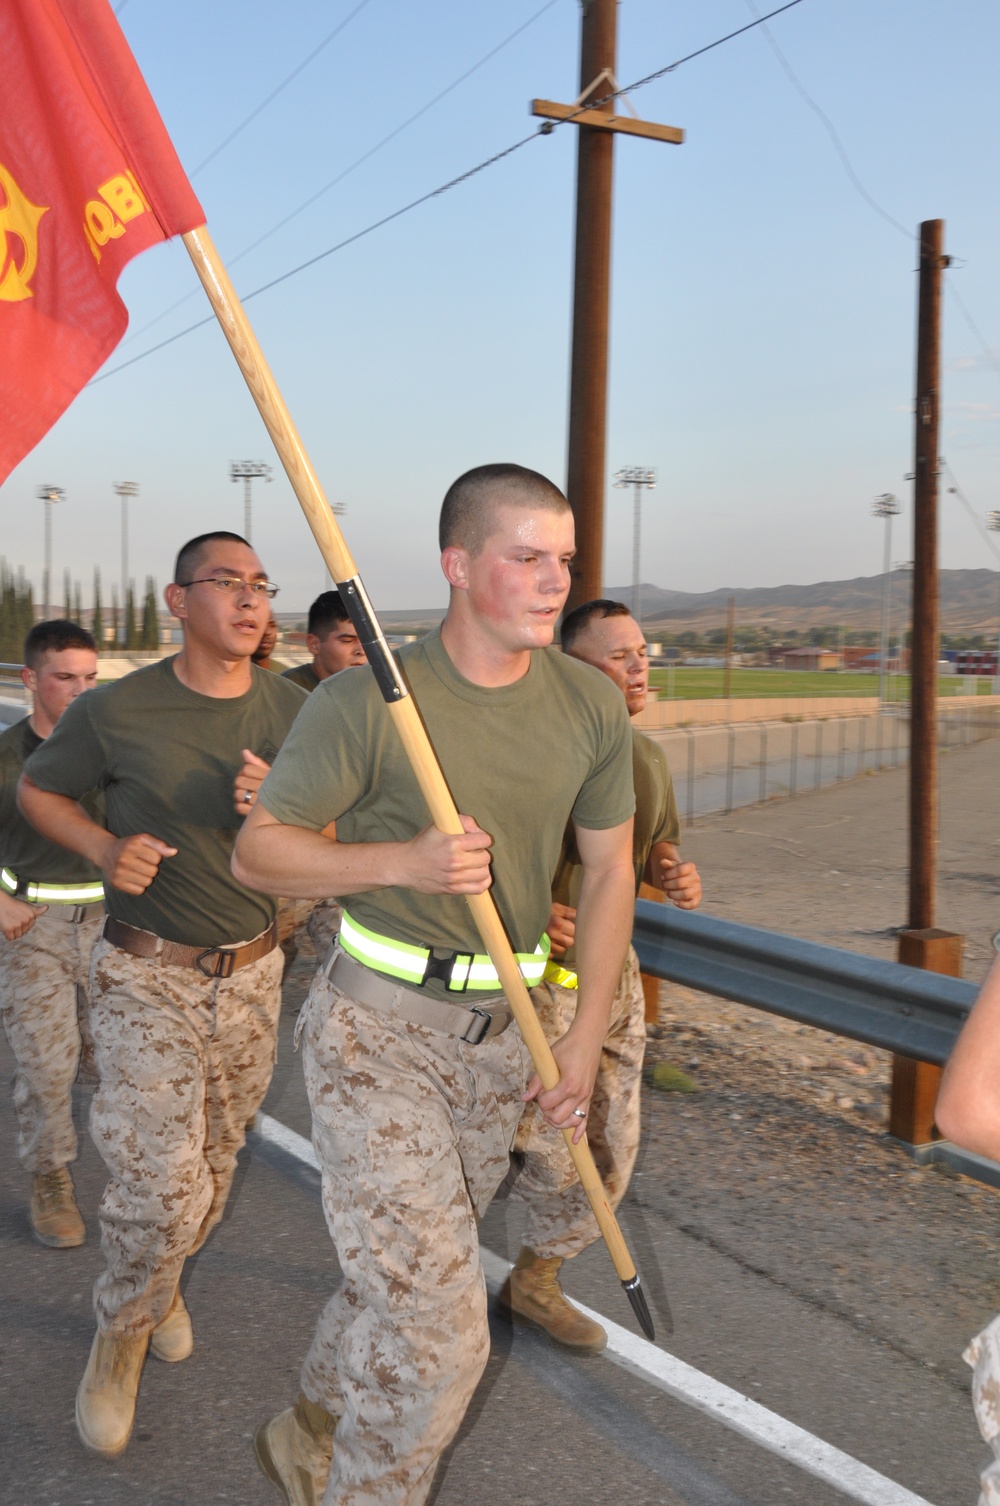 PT on MCLB Barstow